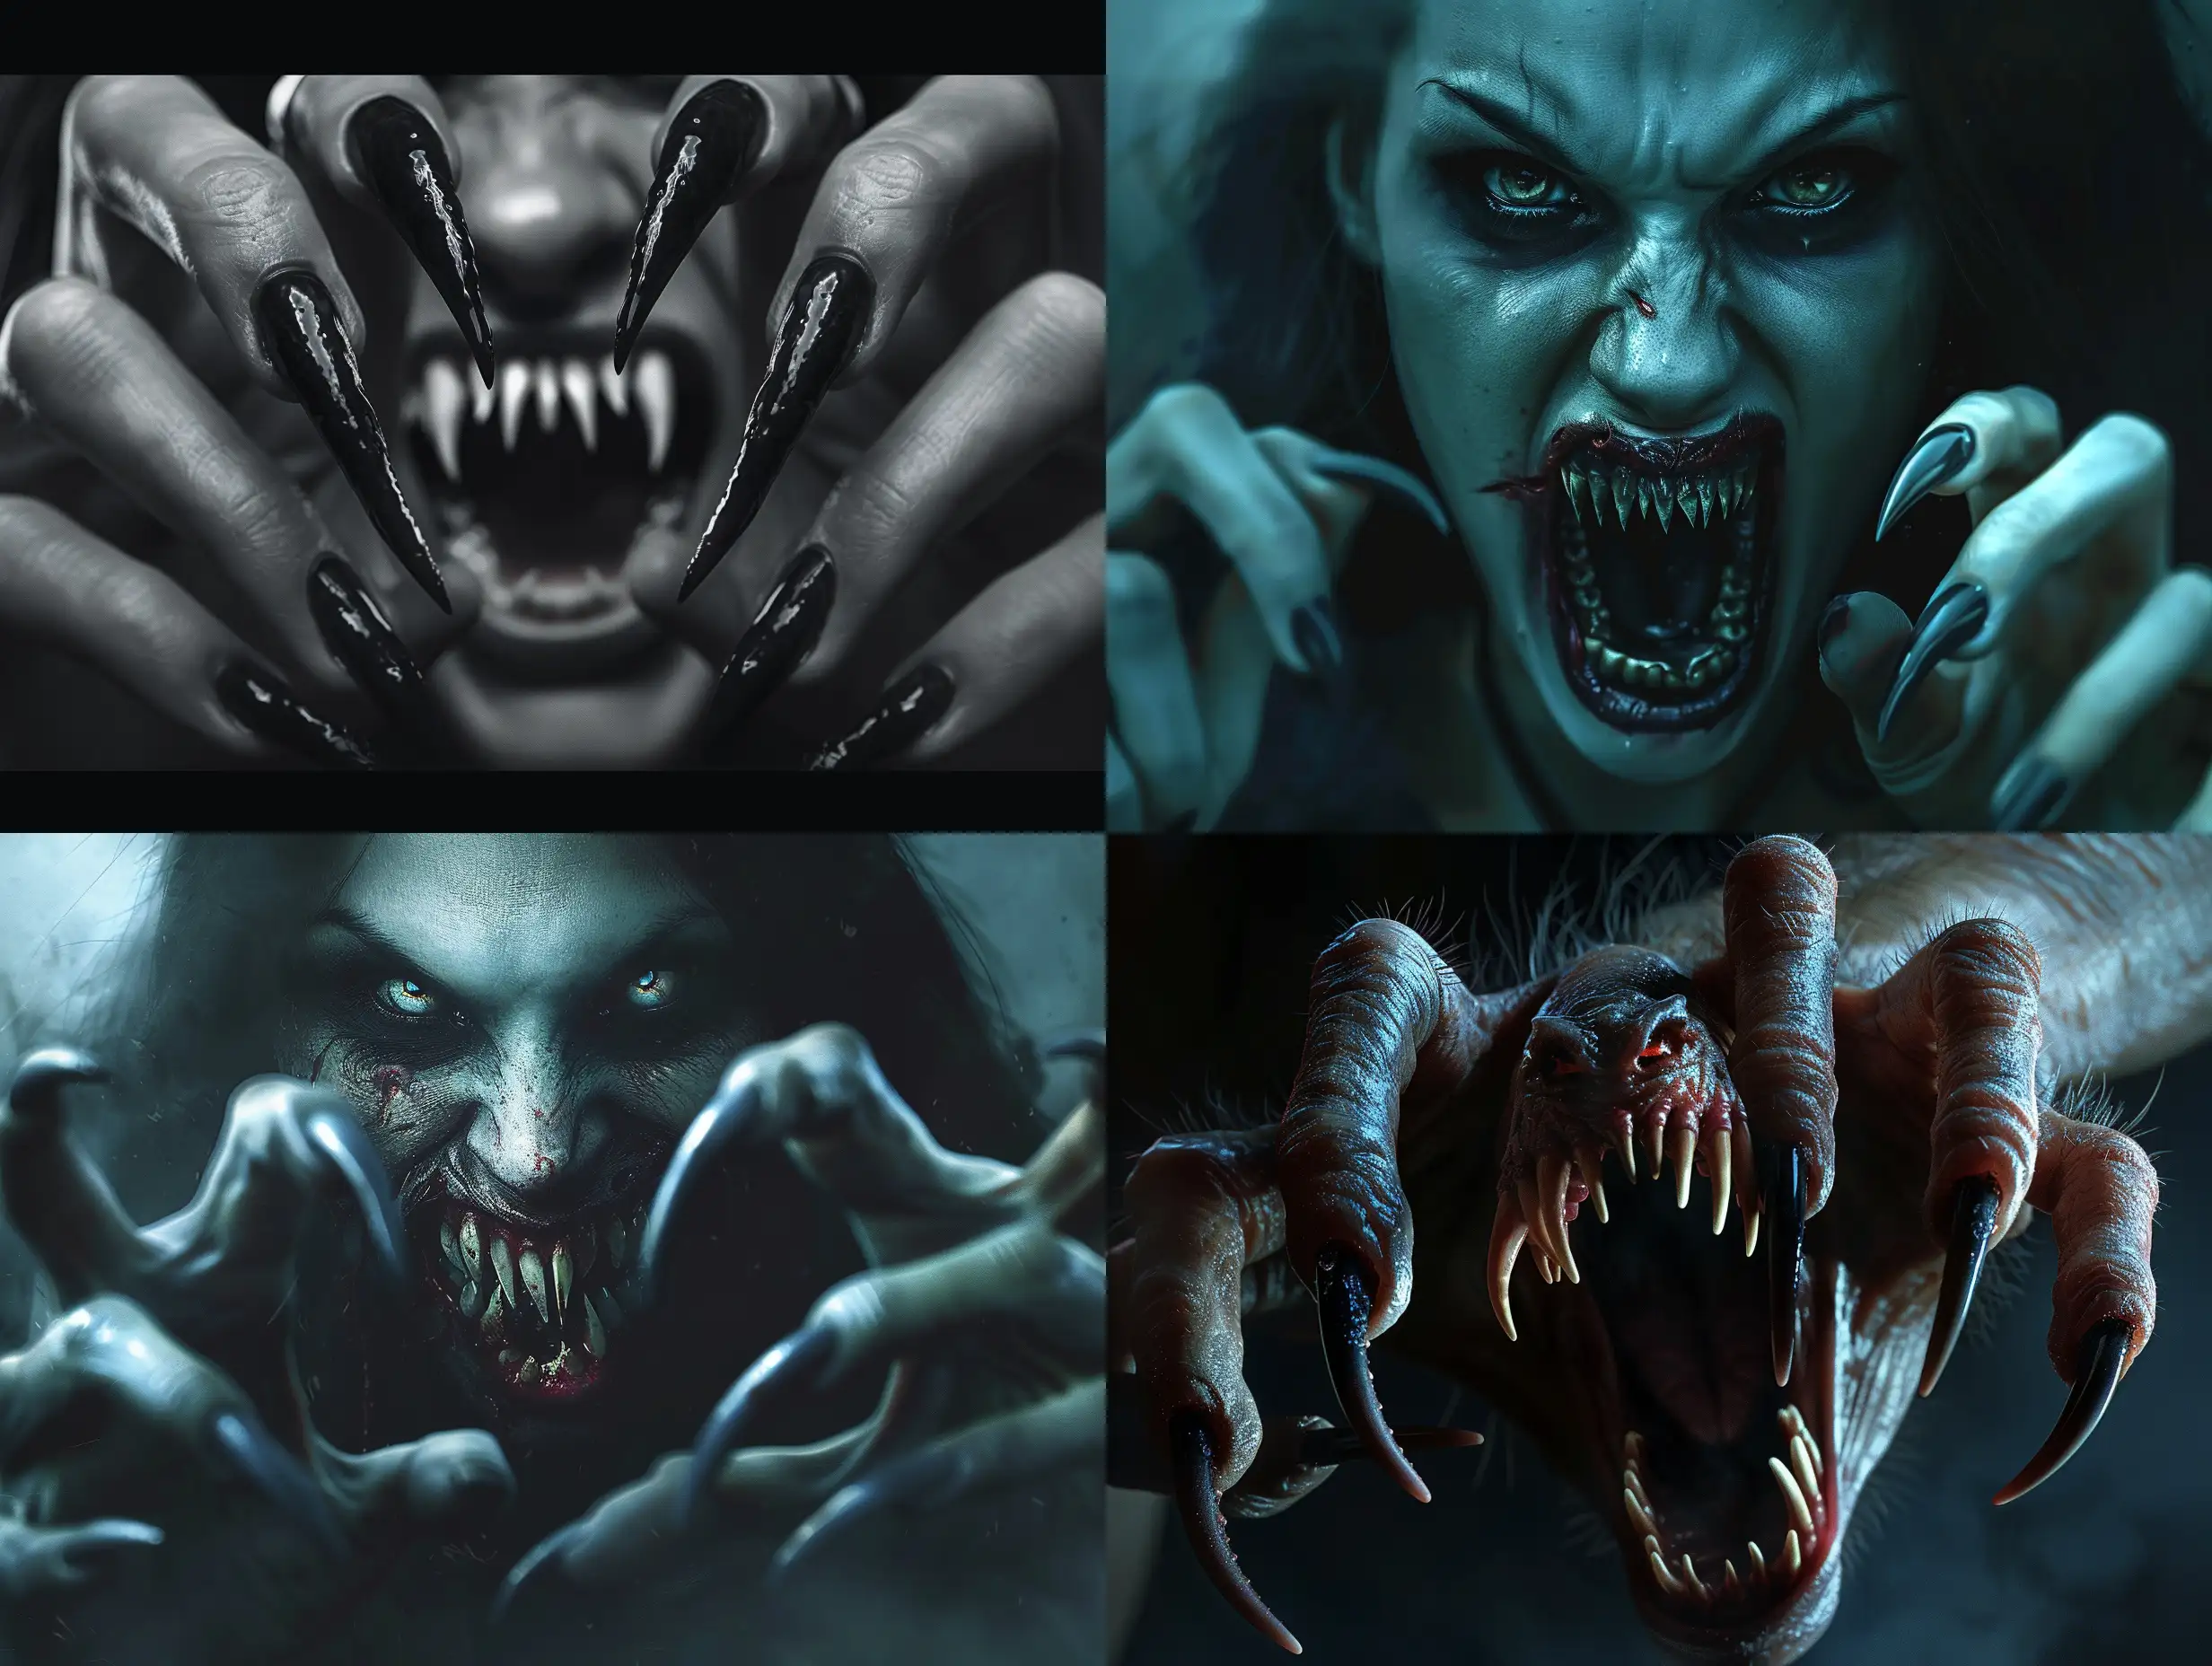 Photorealism nightmare scene of a monstrous female vampire with long, curved, pointed nails, exuding an aggressive and terrifying presence. Her pointed, crooked teeth form a scary expression amidst a dark and atmospheric setting. The high-quality depiction should capture the aggressive attack, emphasizing her predatory fangs and detailed nails in a hyper-realistic manner. The lighting should contribute to the horror atmosphere, ensuring a full-body portrayal with realistic hyper-detail. The character design should convey a playful yet menacing quality, with full anatomical accuracy including distinctly human hands with five fingers. The final image must be very clear without flaws, portraying the vampire with unparalleled photorealism.